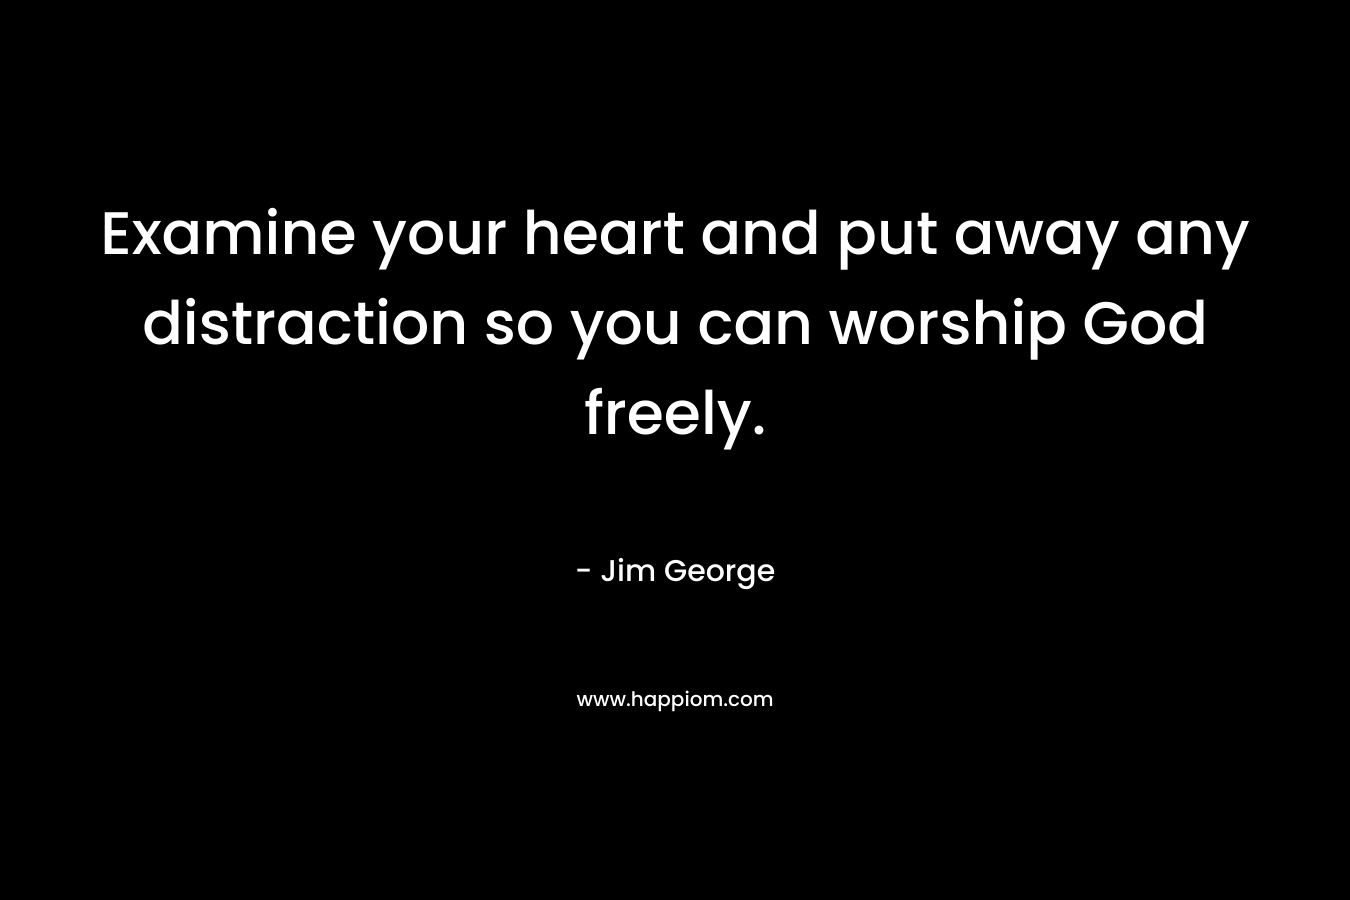 Examine your heart and put away any distraction so you can worship God freely. – Jim George